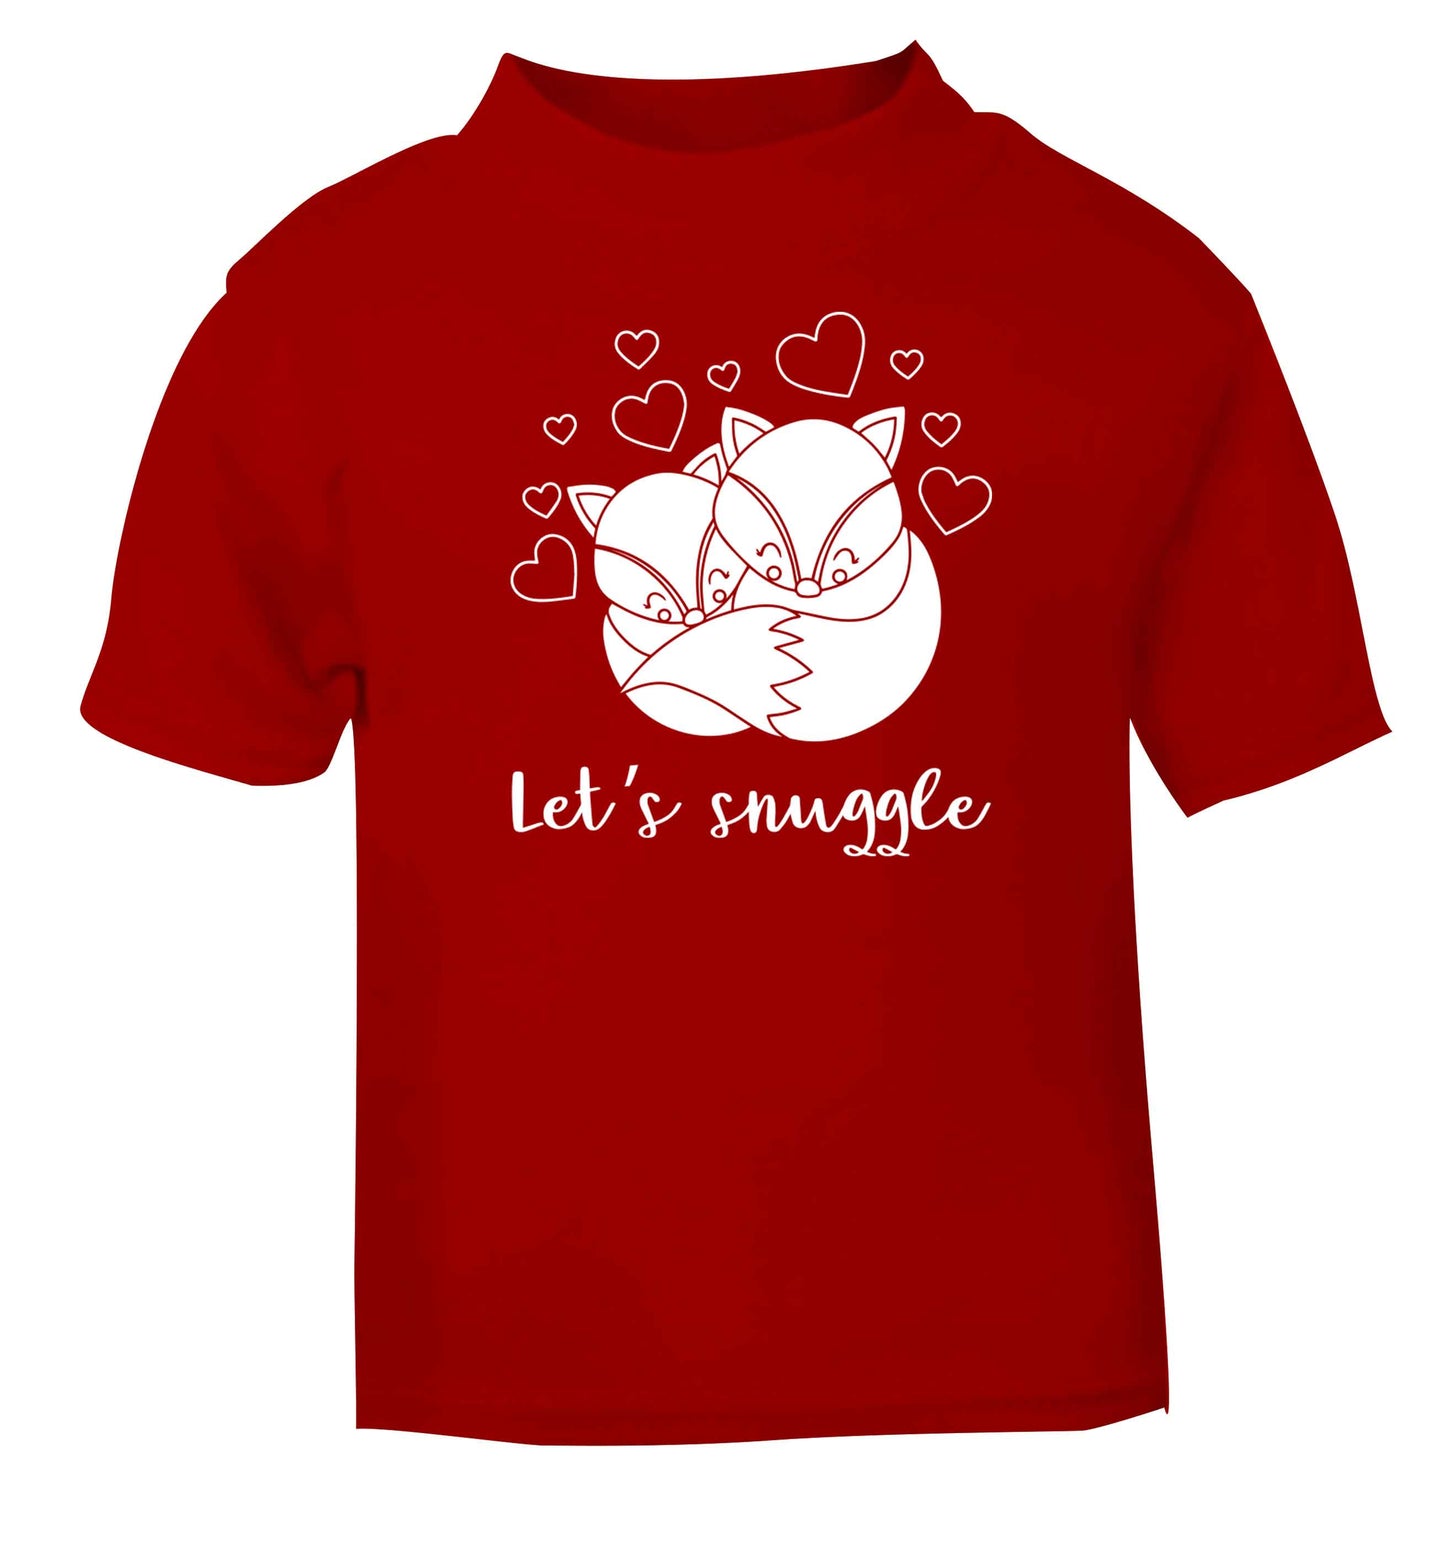 Let's snuggle red baby toddler Tshirt 2 Years